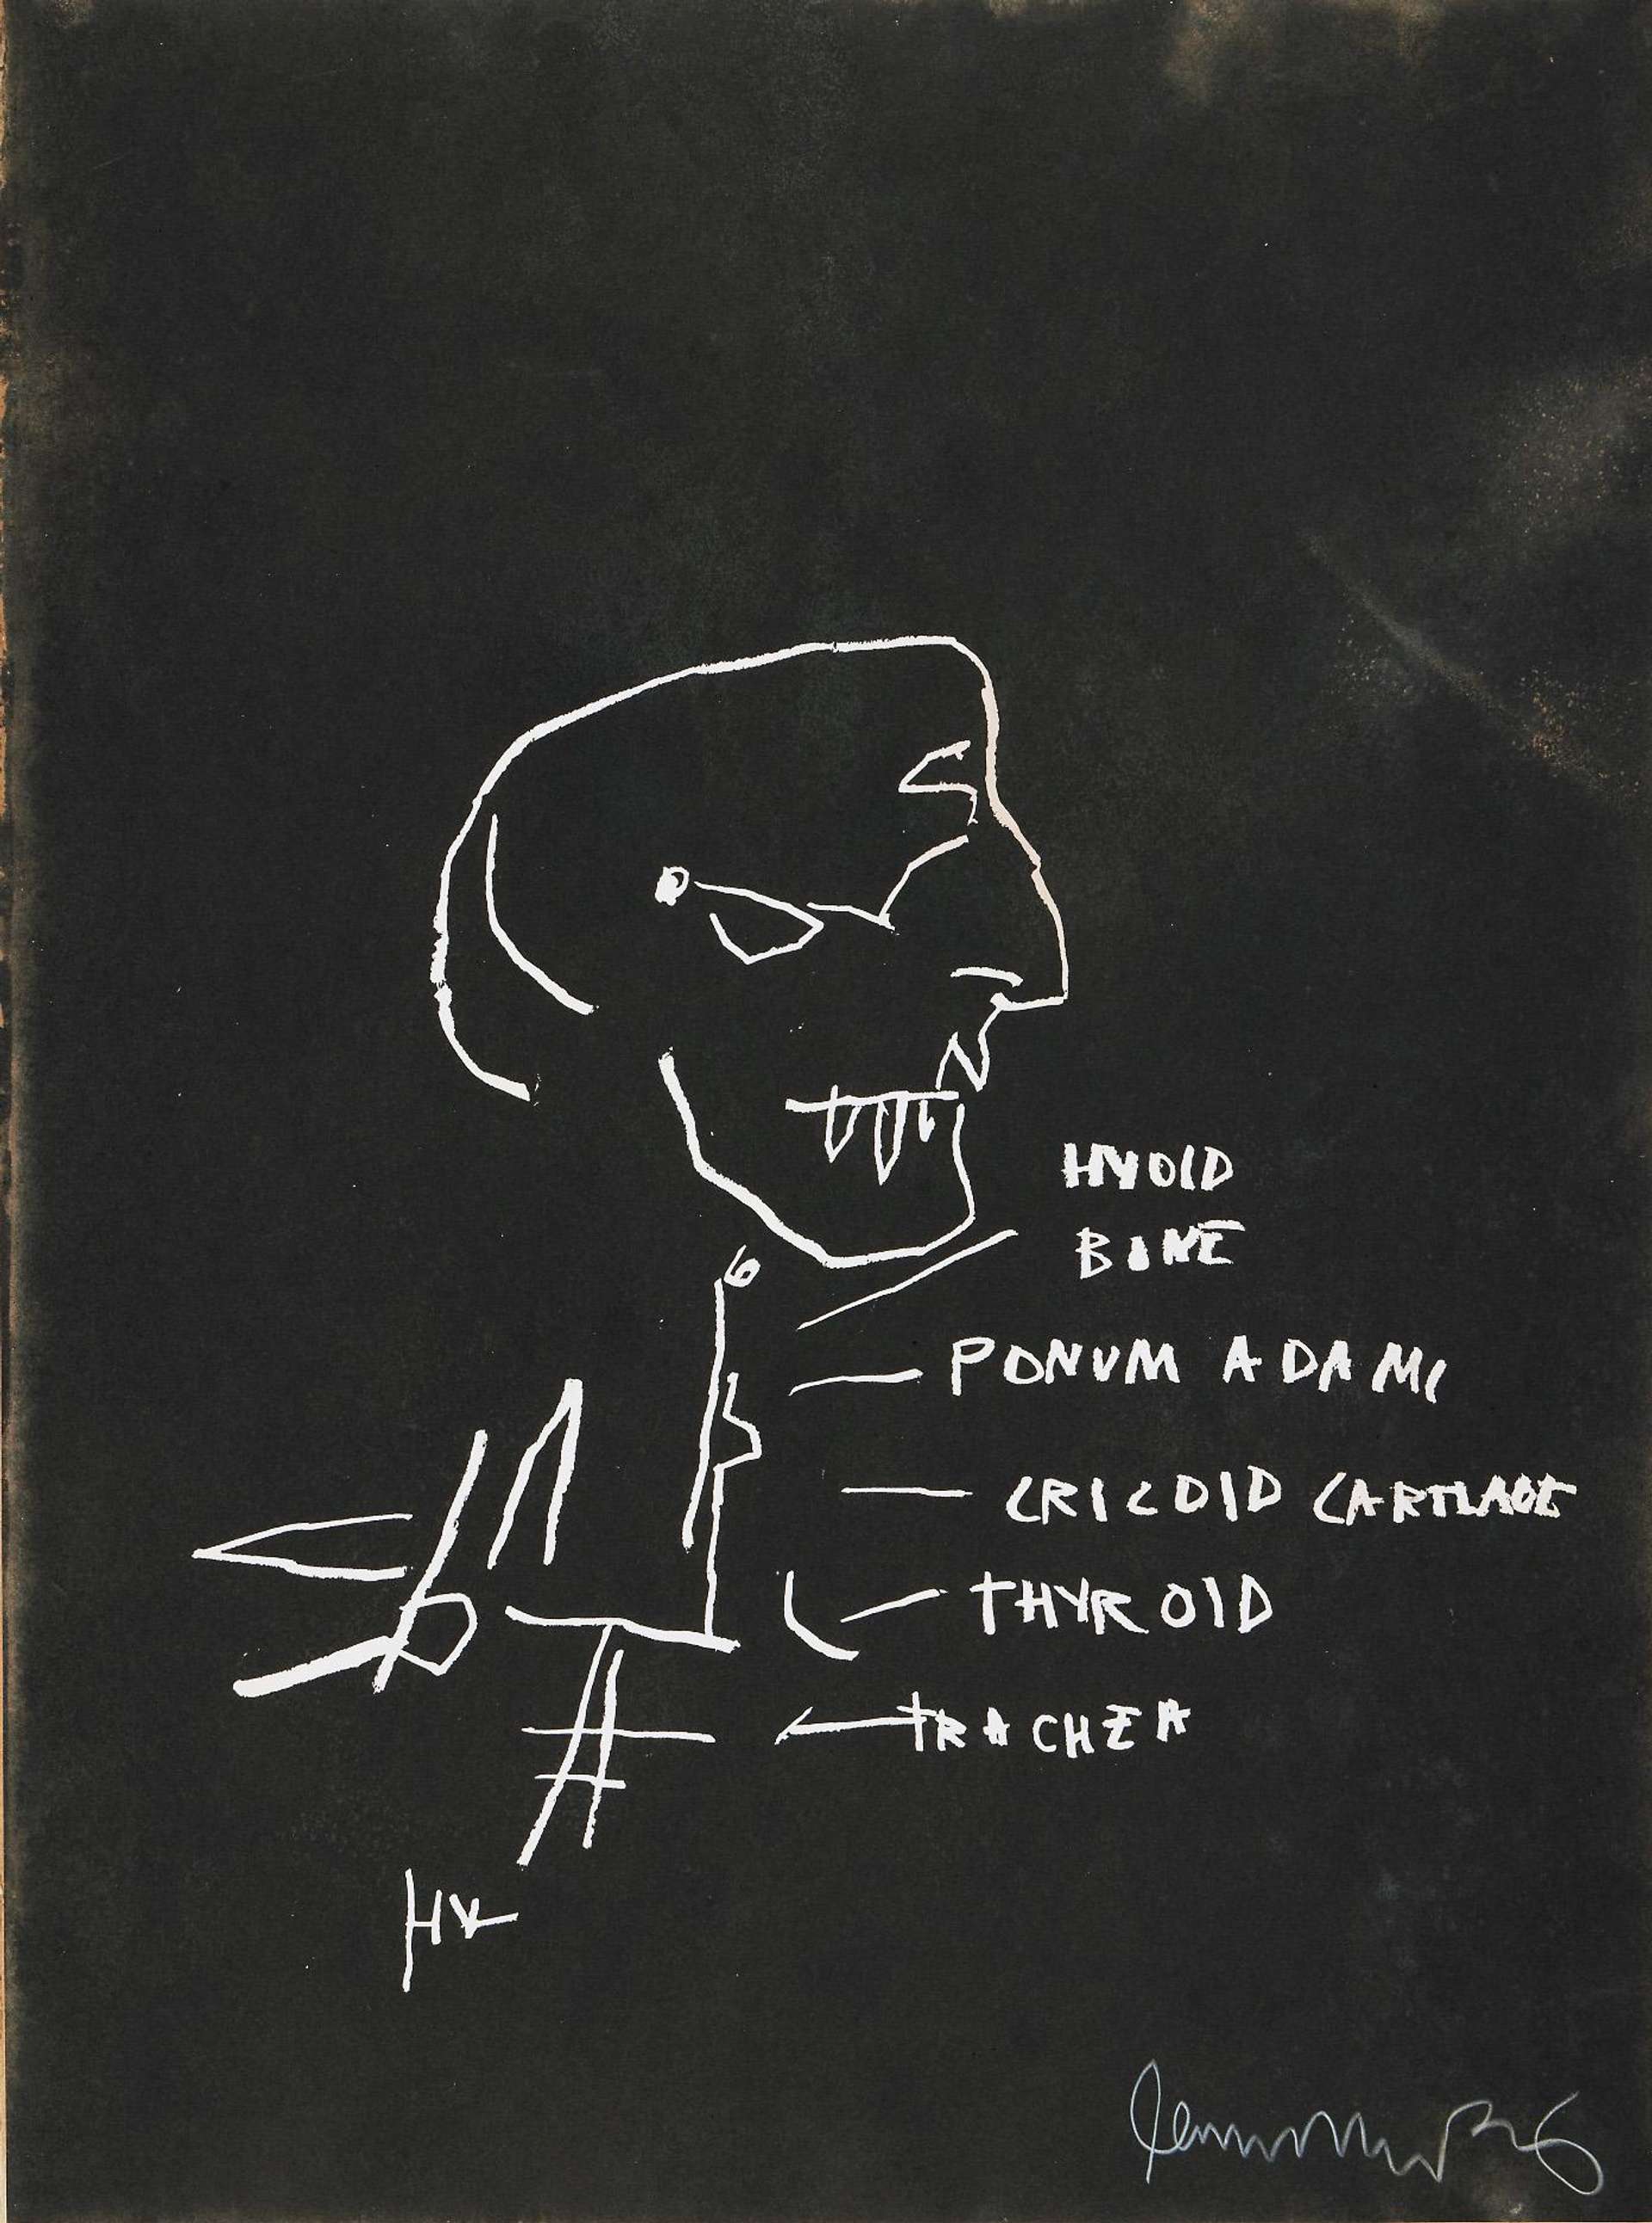 A black screenprint by Jean-Michel Basquiat featuring sketchbook-style drawings of a skeletal head and other doodles resembling a skeletal figure, with labeled parts.